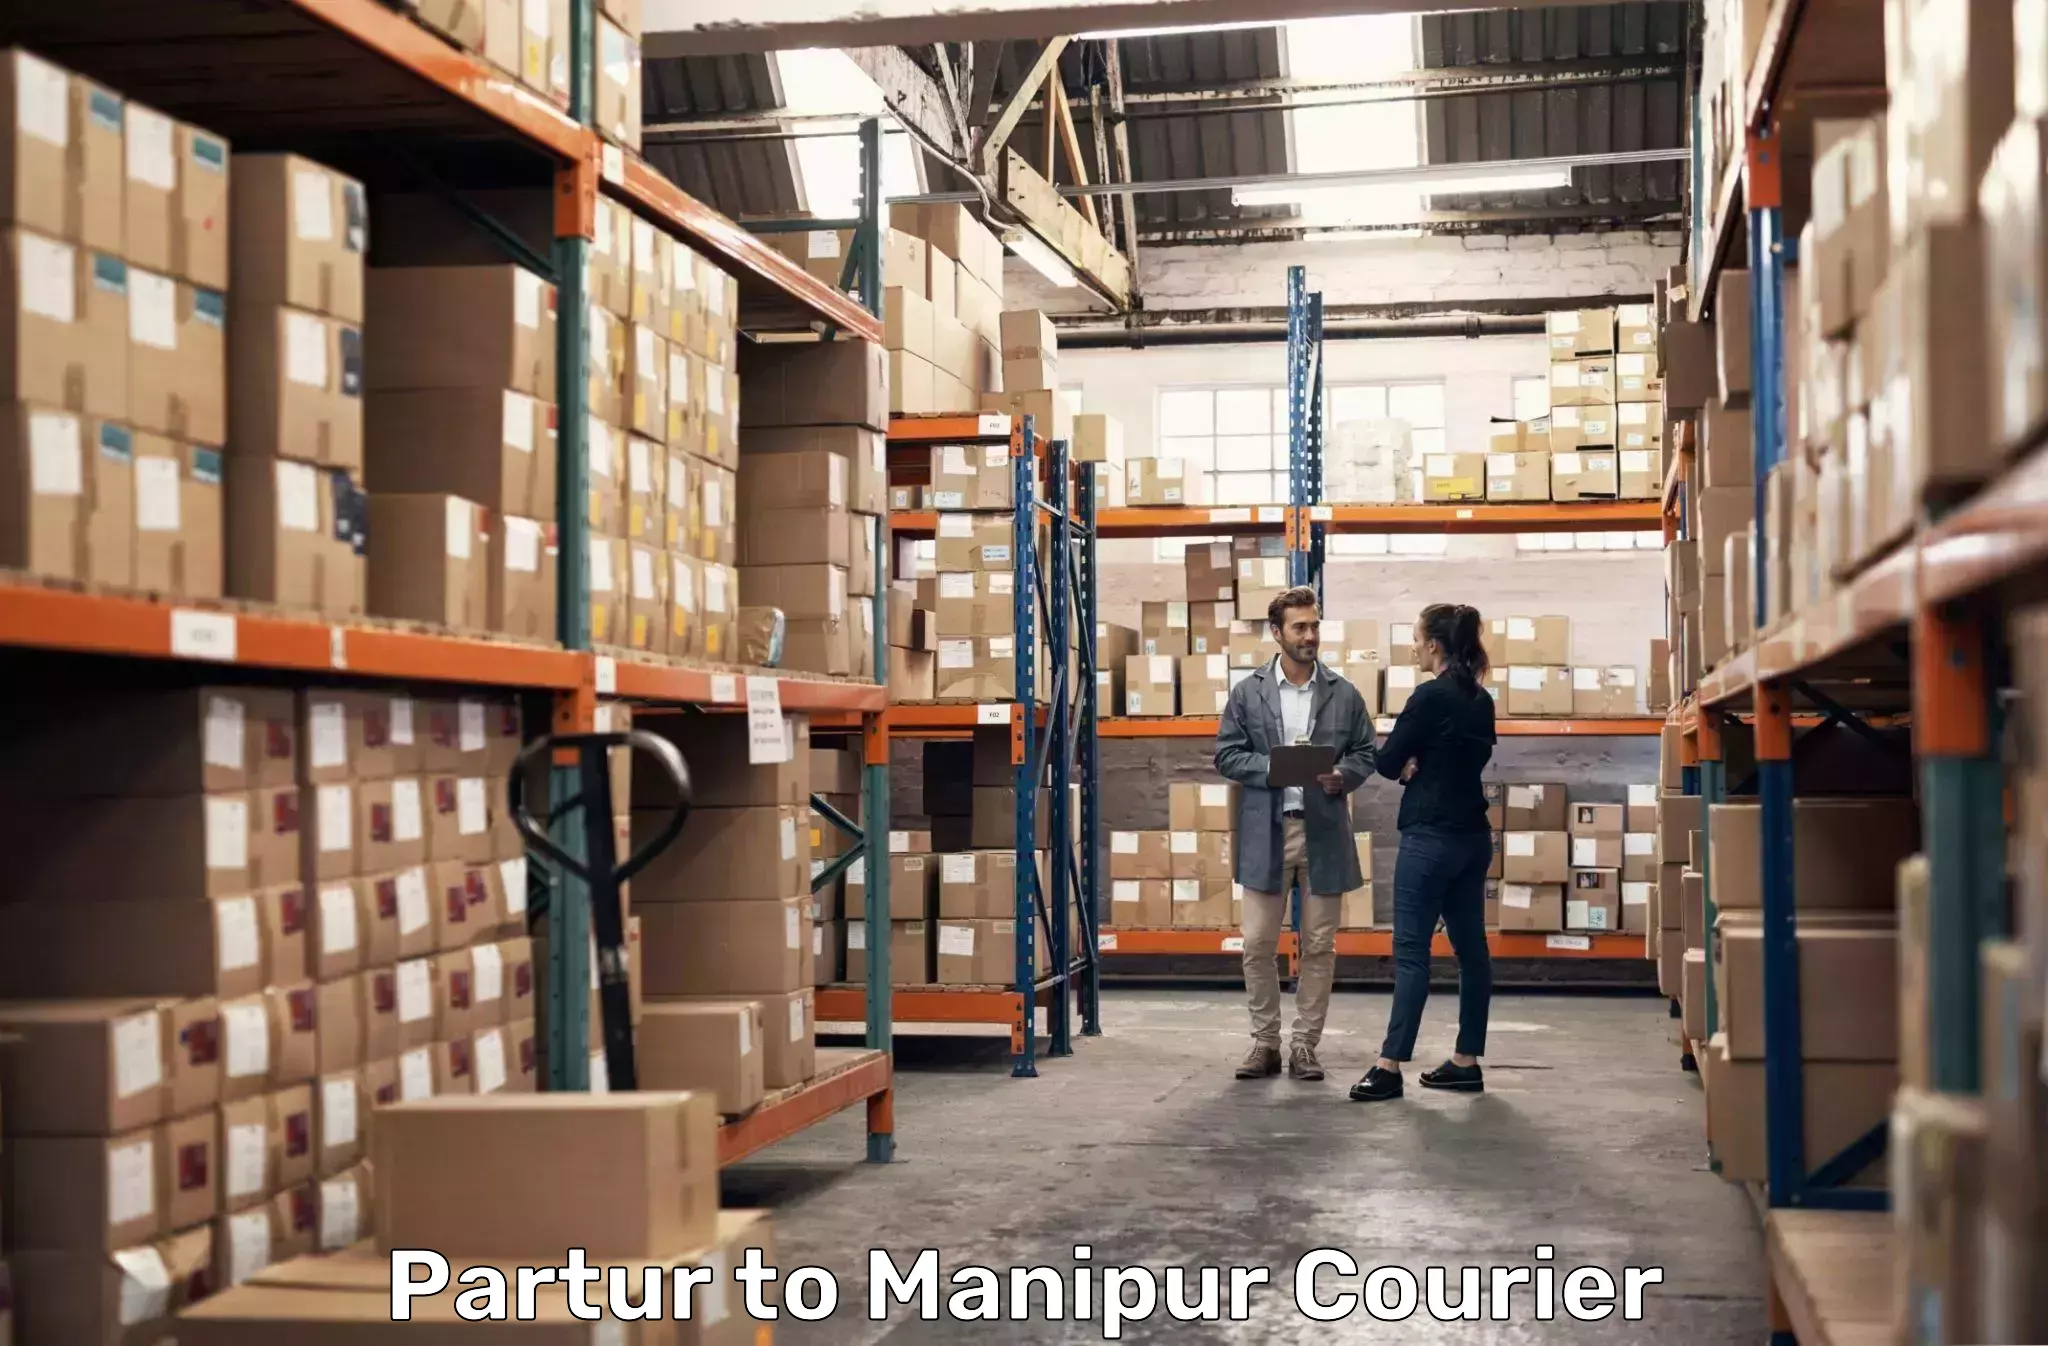 Nationwide shipping services Partur to Manipur